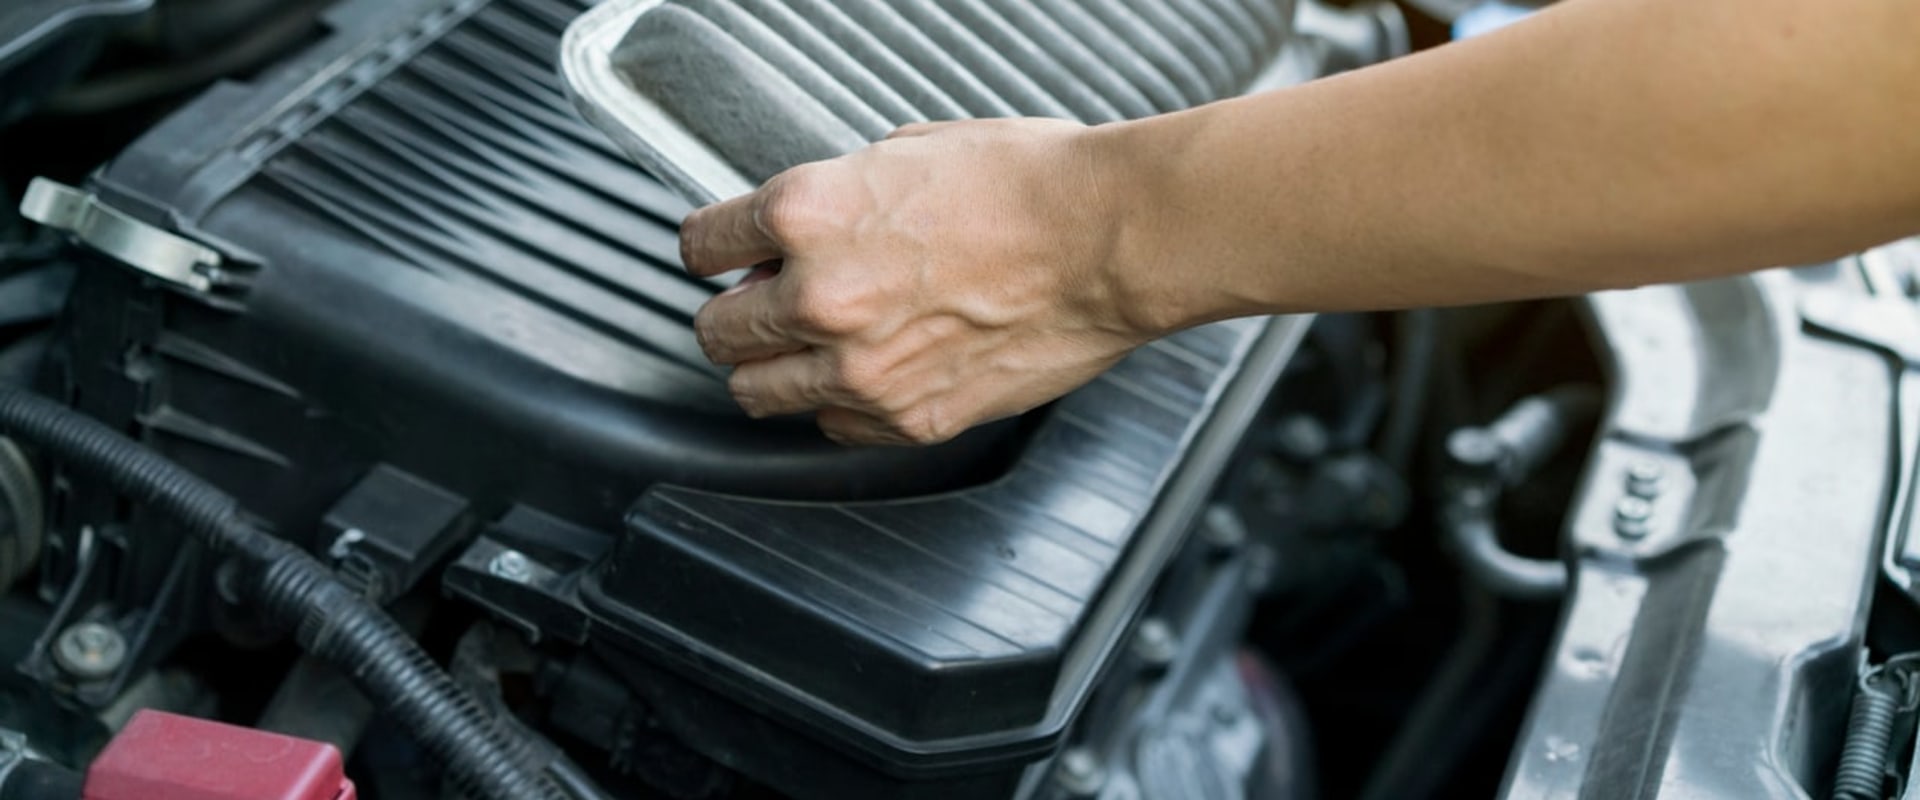 How Long Should an Engine Air Filter Last? - An Expert's Guide